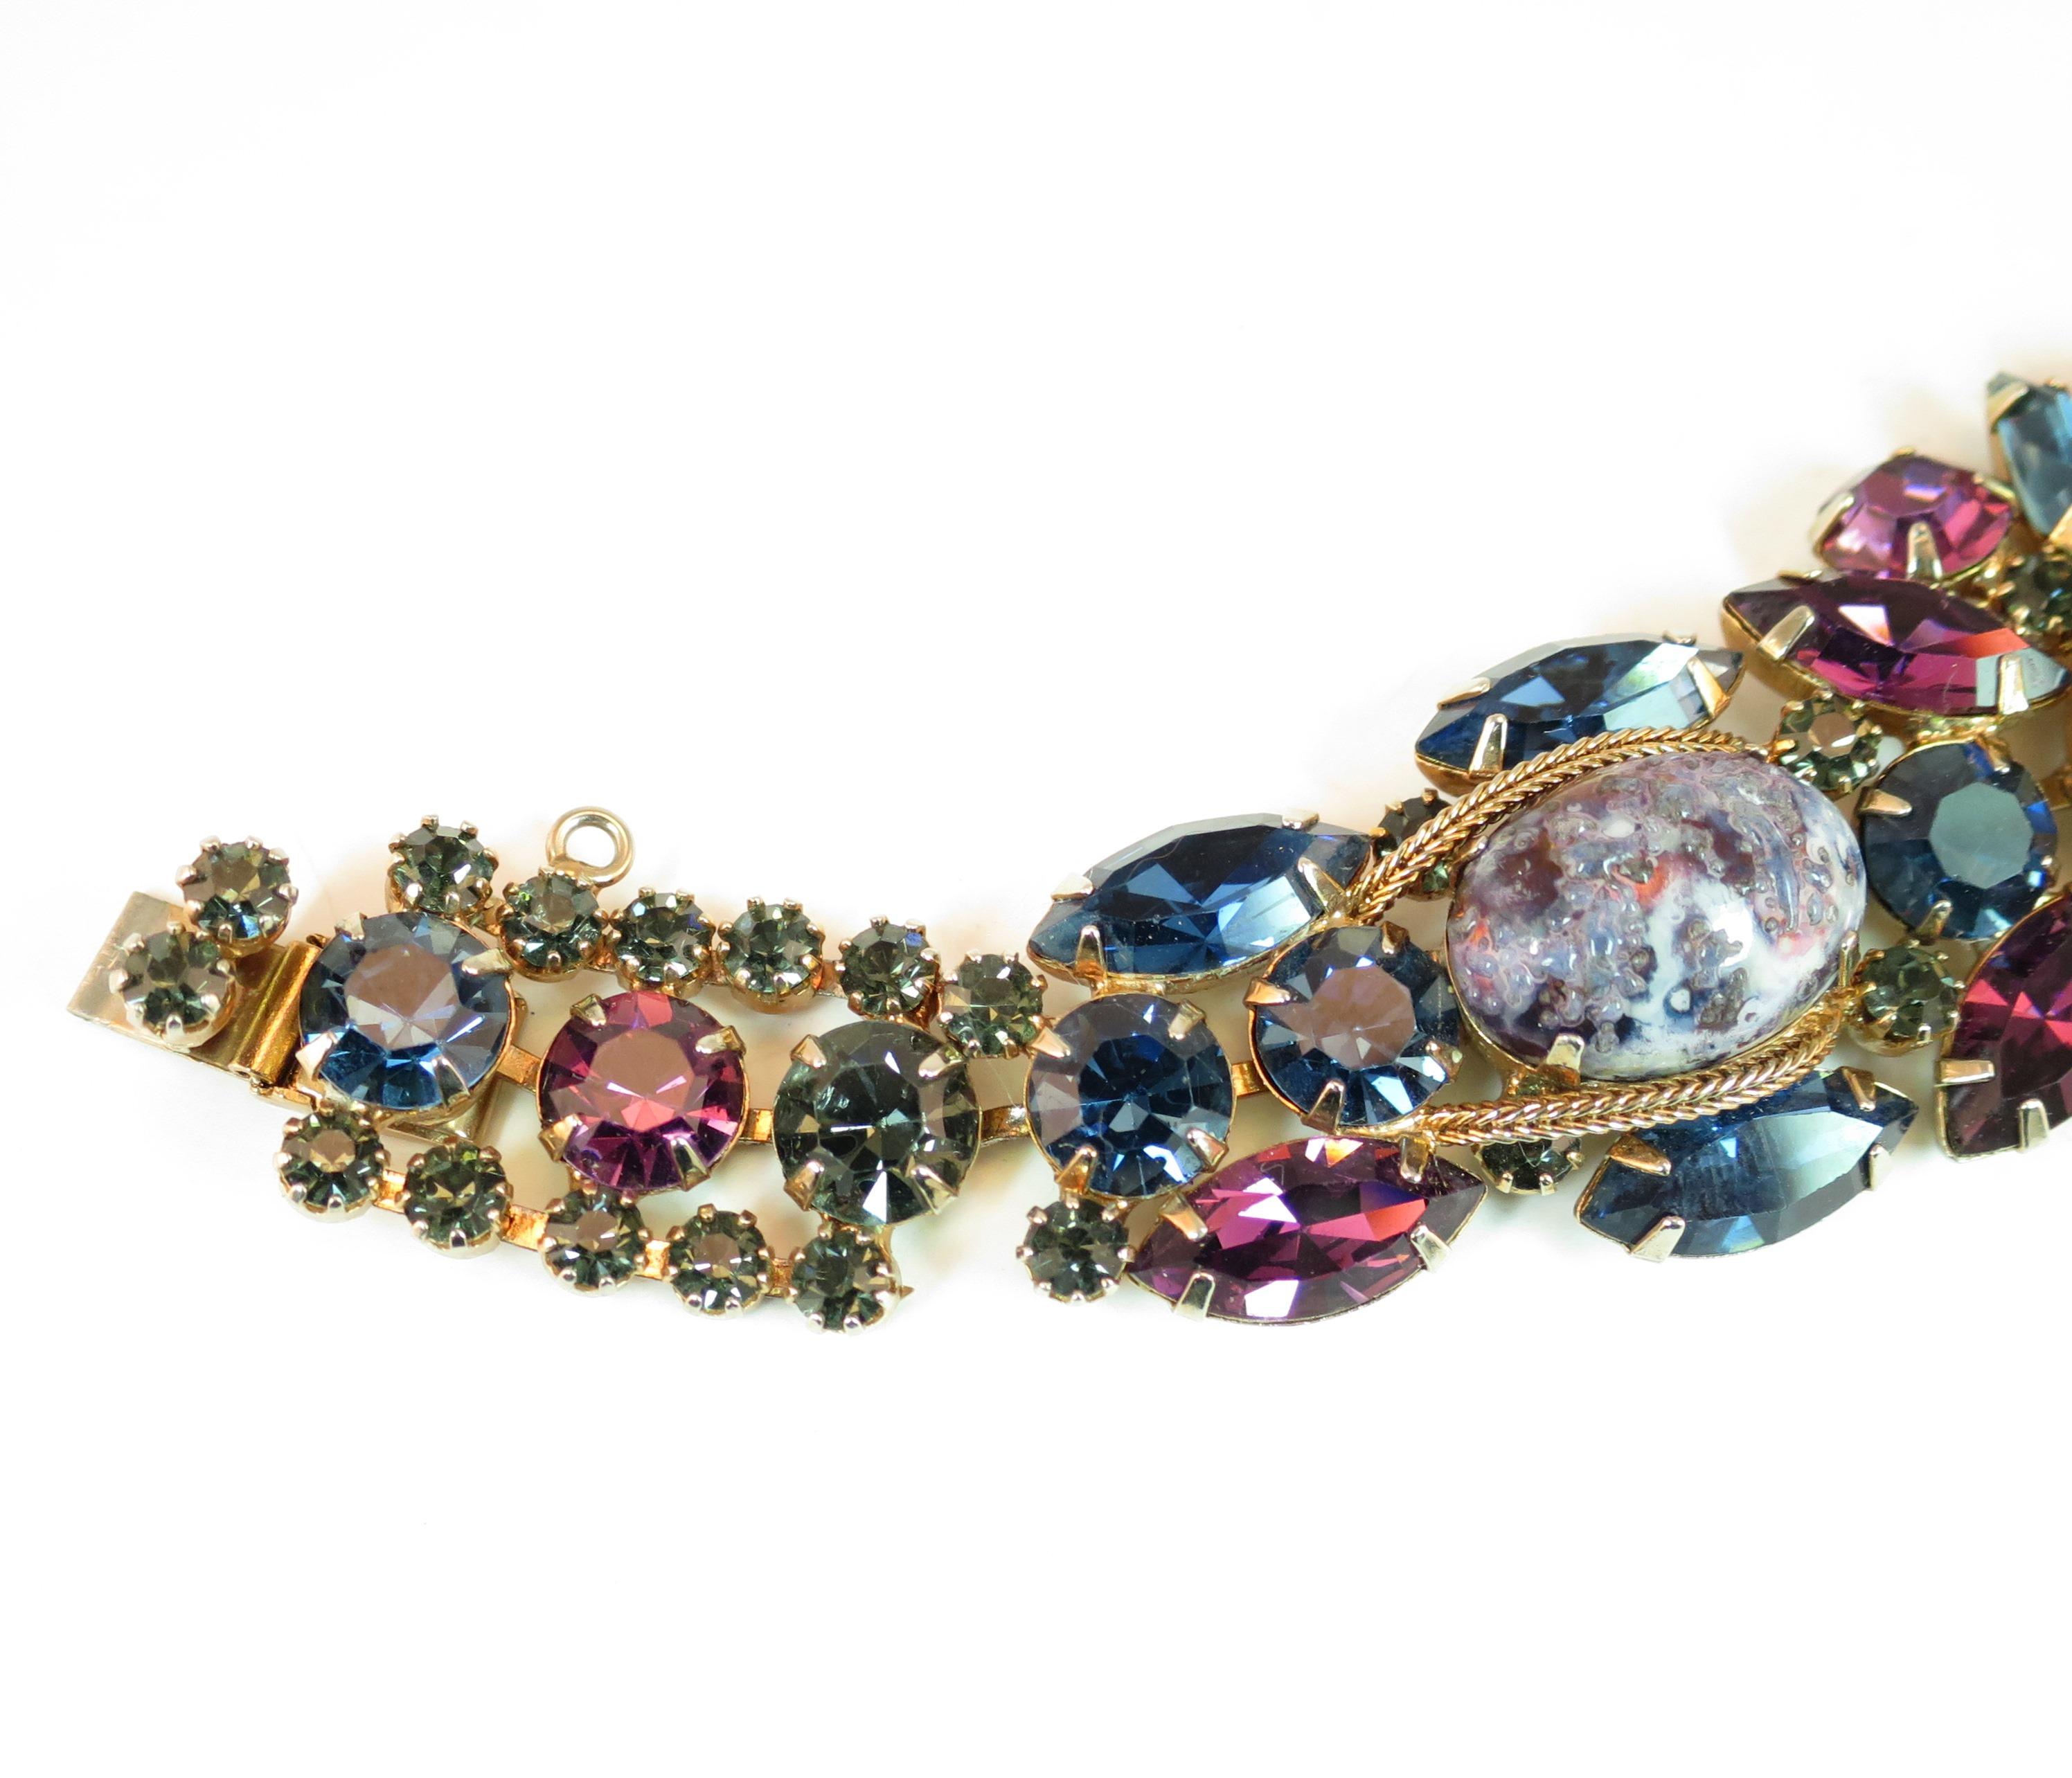 Offered here is a DeLizza & Elster Juliana gold-plated bracelet featuring their famous 